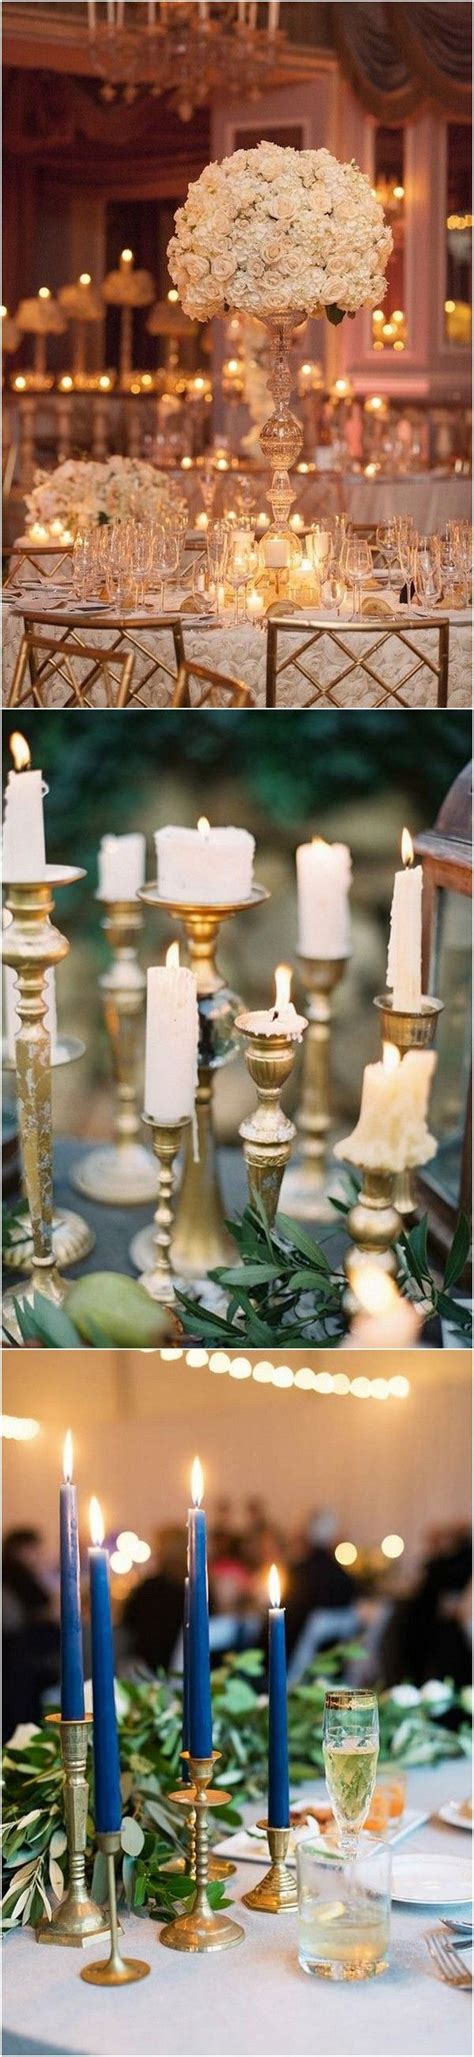 Top 20 Vintage Wedding Centerpieces With Candlesticks